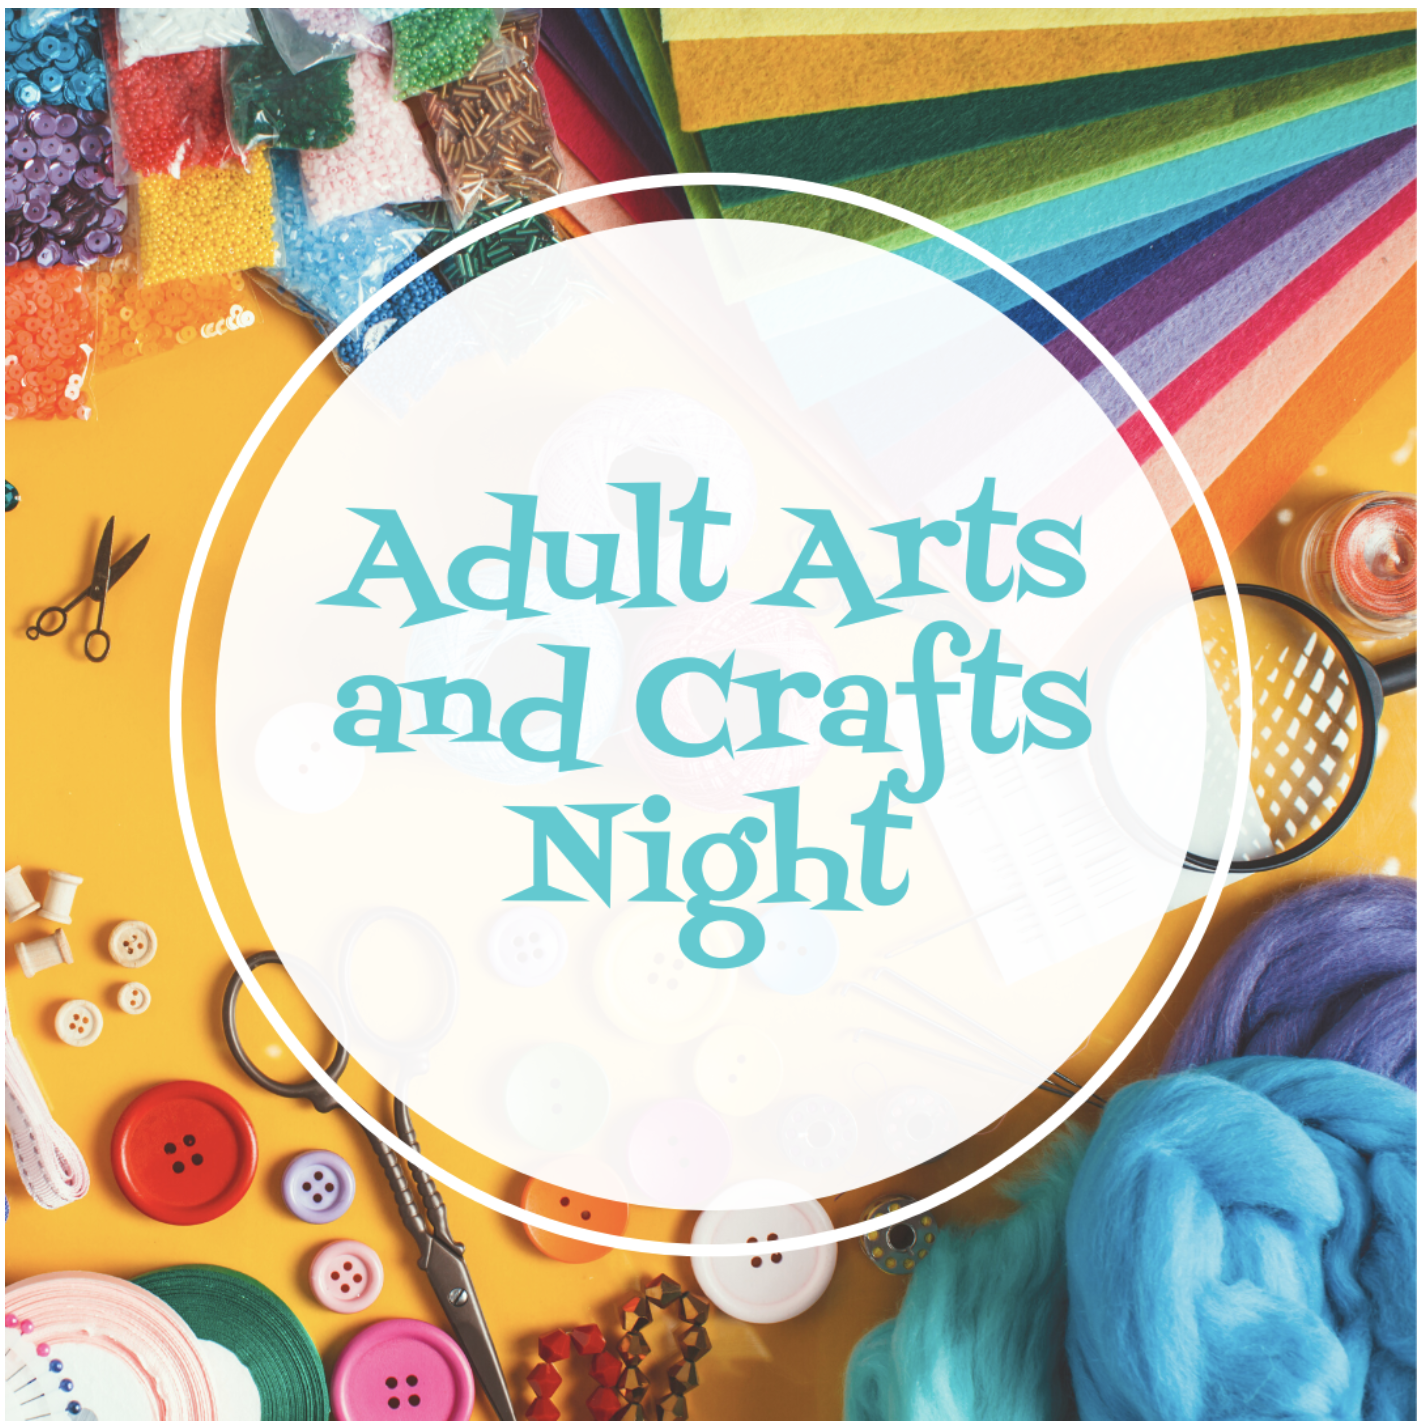 Adult Arts and Crafts Night, at Unknown, Art